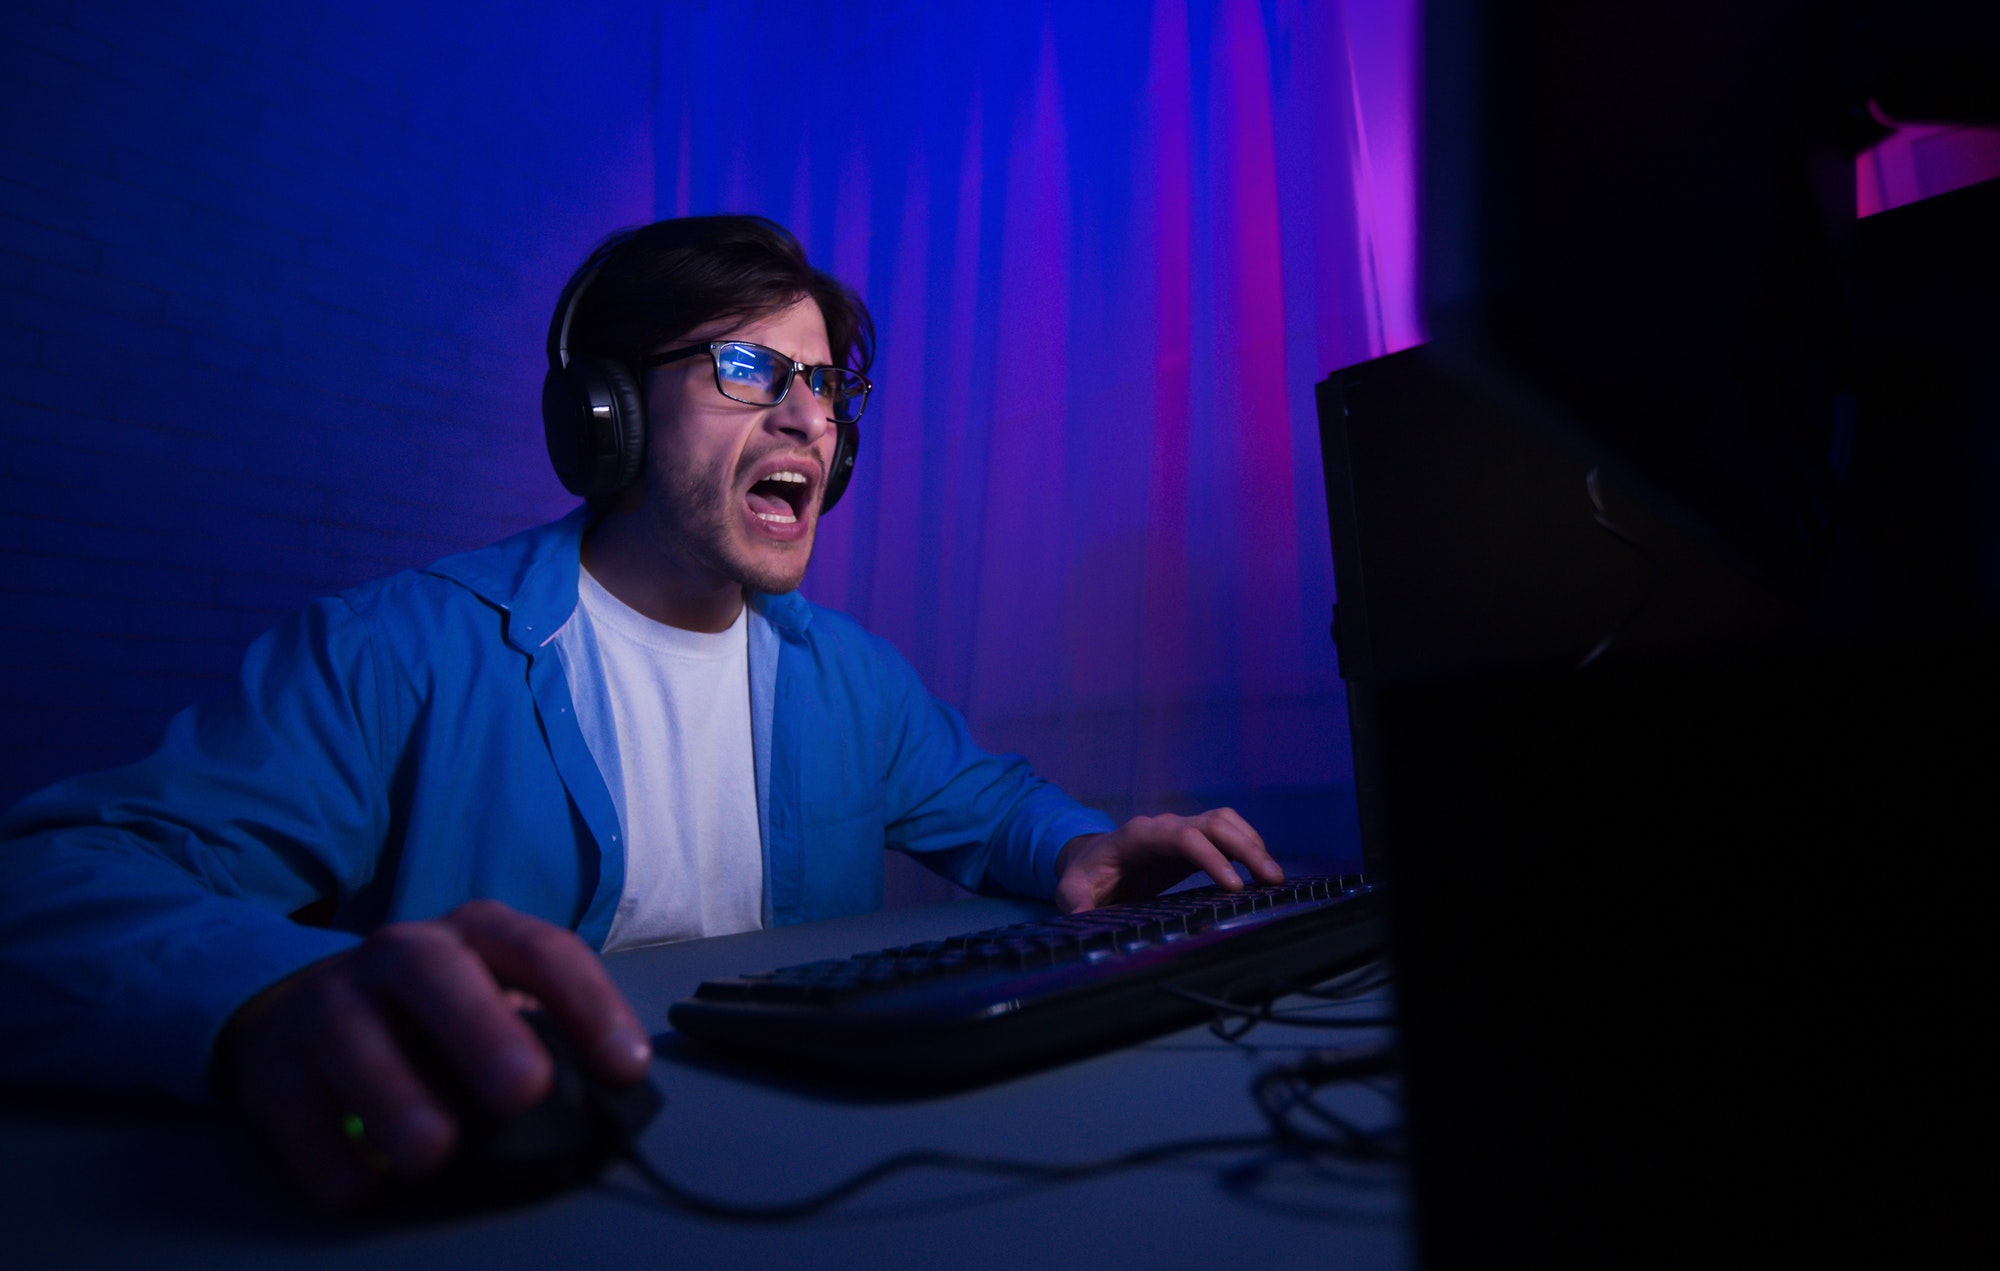 Emotional gamer playing video game online and shouting